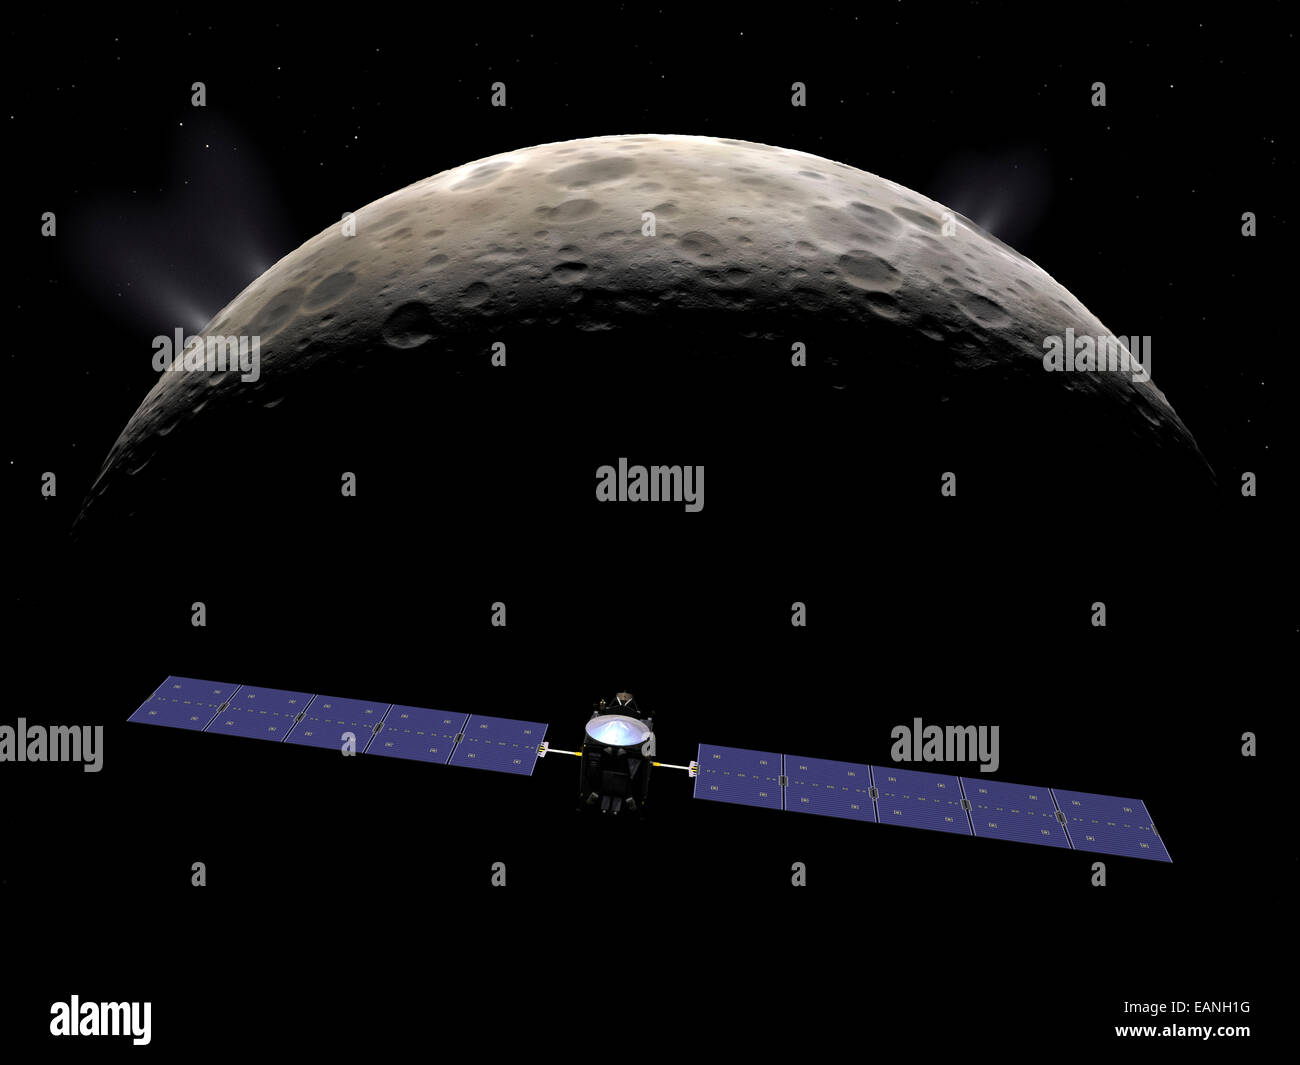 Artist's concept of the Dawn spacecraft entering orbit around the dwarf planet Ceres. In late November 2015 Dawn will descend to Stock Photo